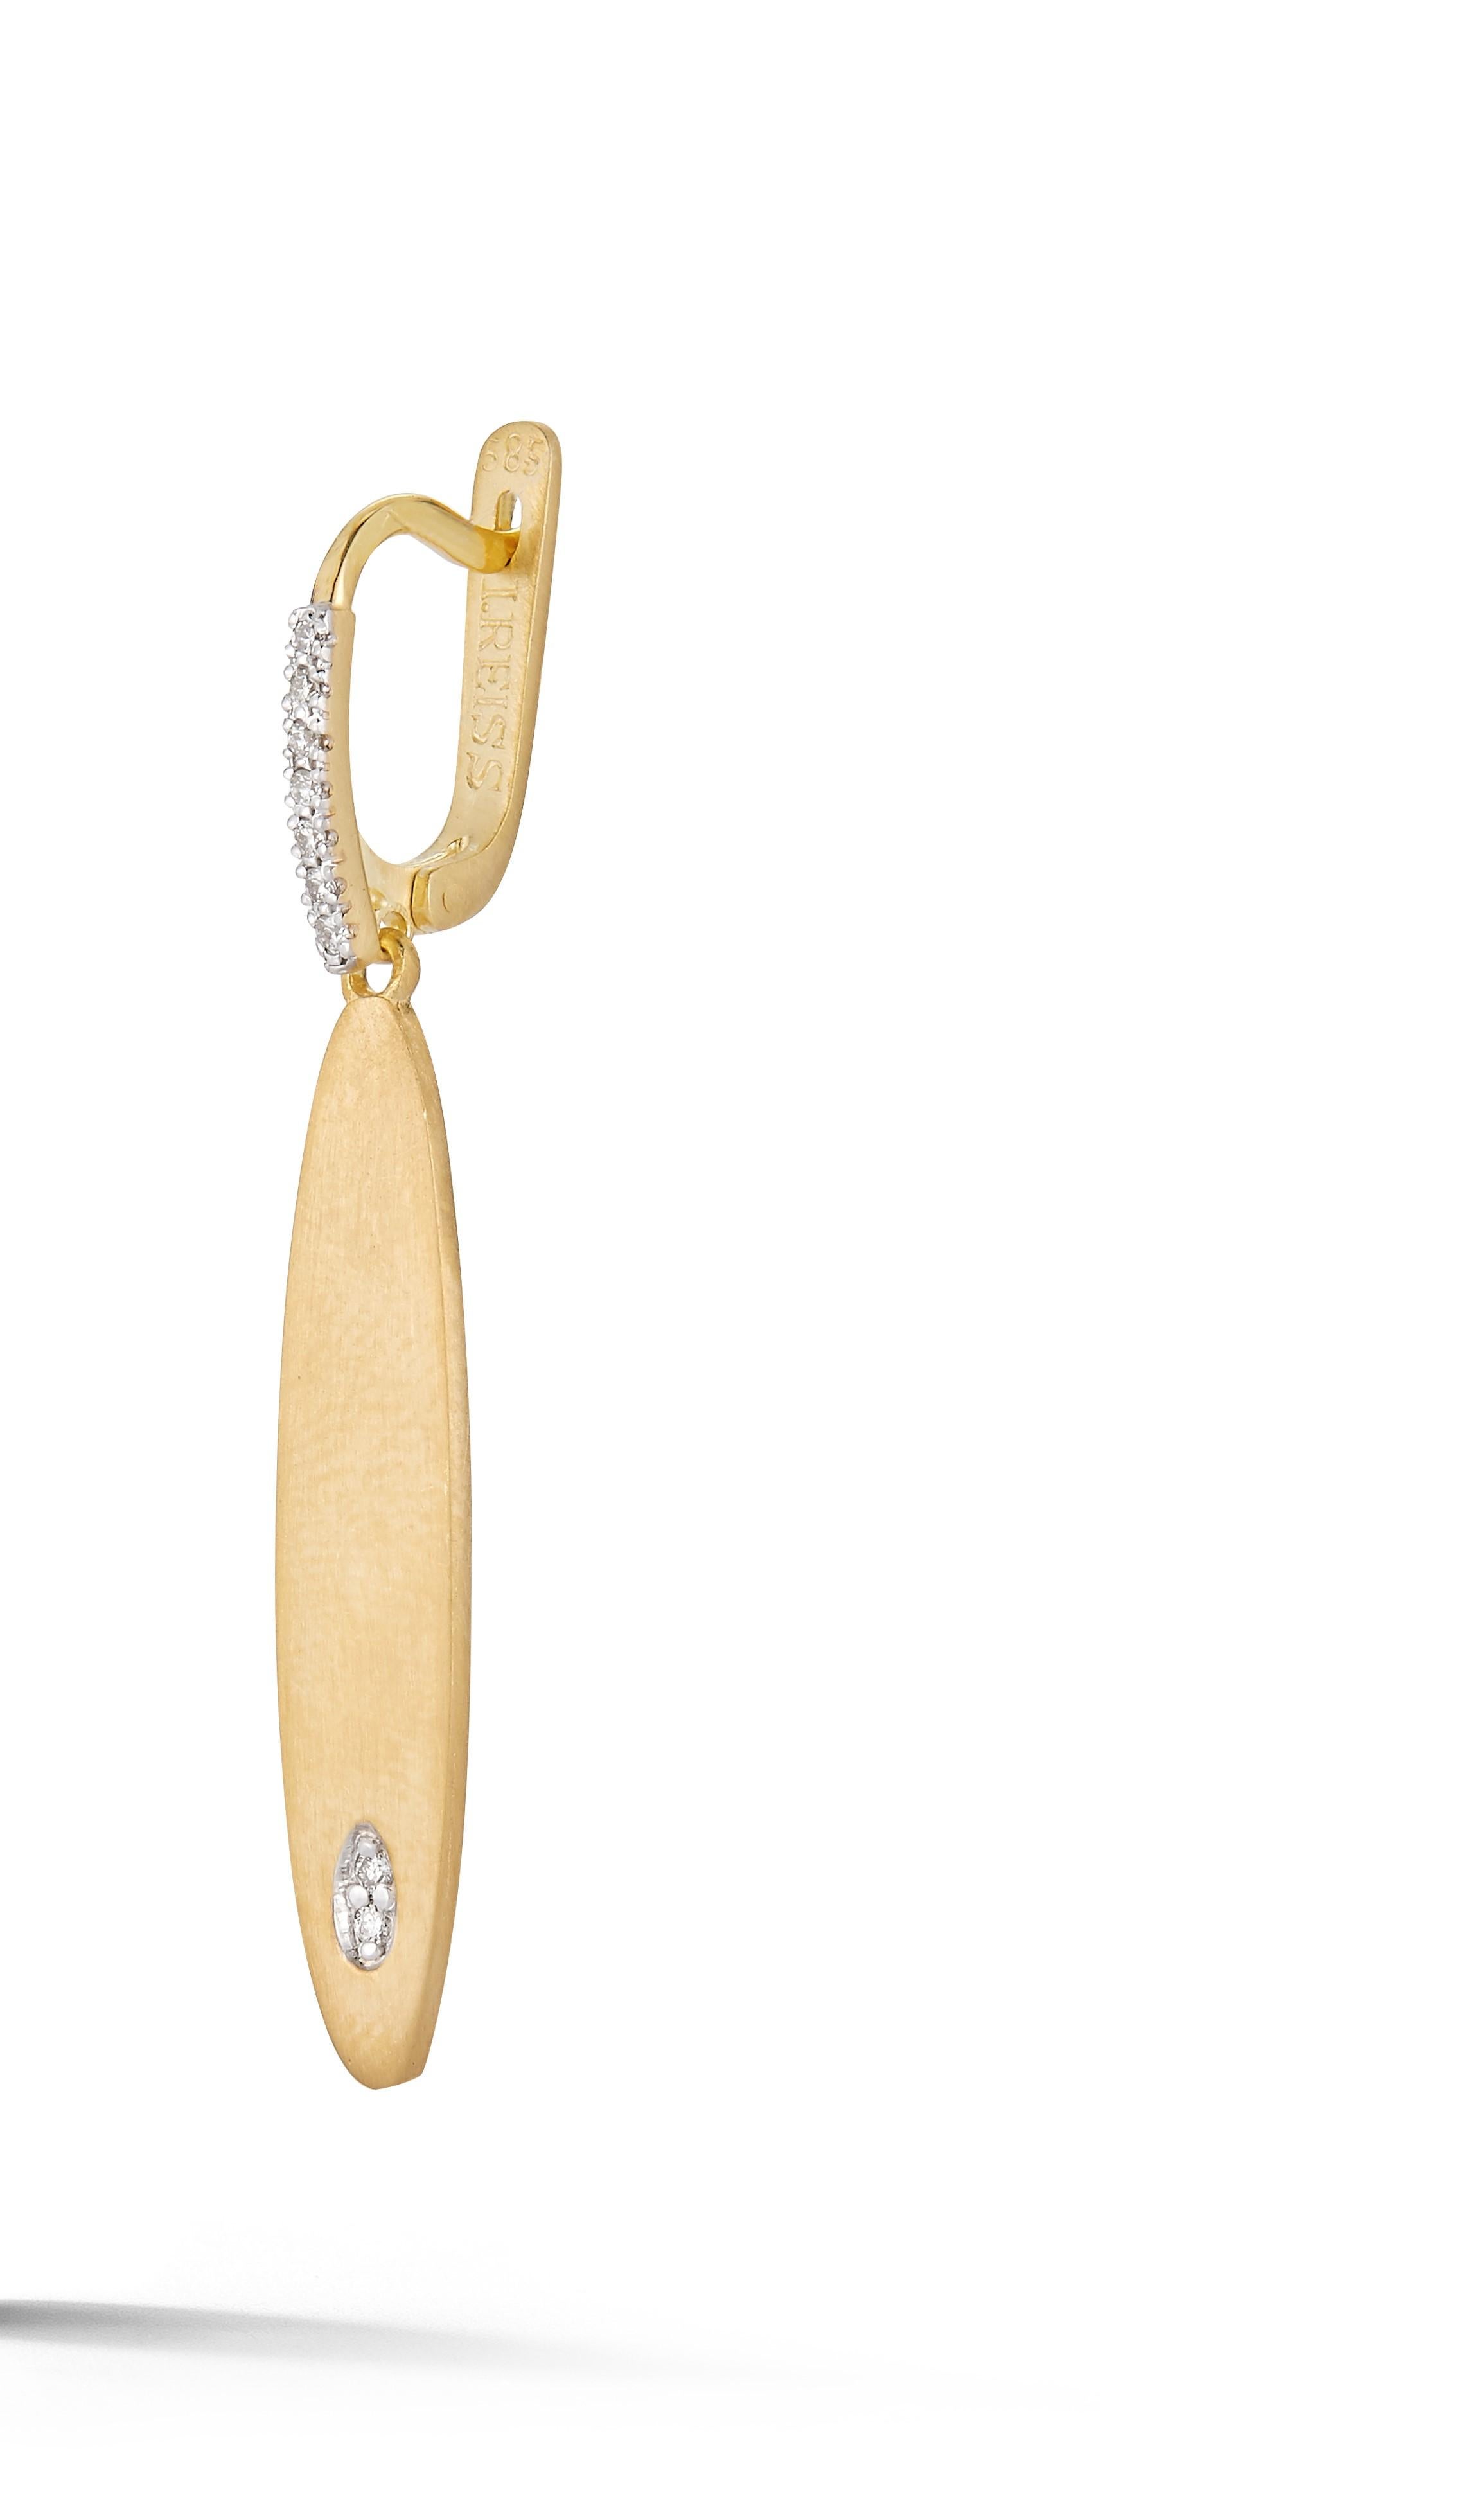 14 Karat Yellow Gold Hand-Crafted Satin-Finished Narrow Oval-Shaped Dangling Earrings, Accented with 0.13 Carat Diamonds, Set on a Leverback Closure.
